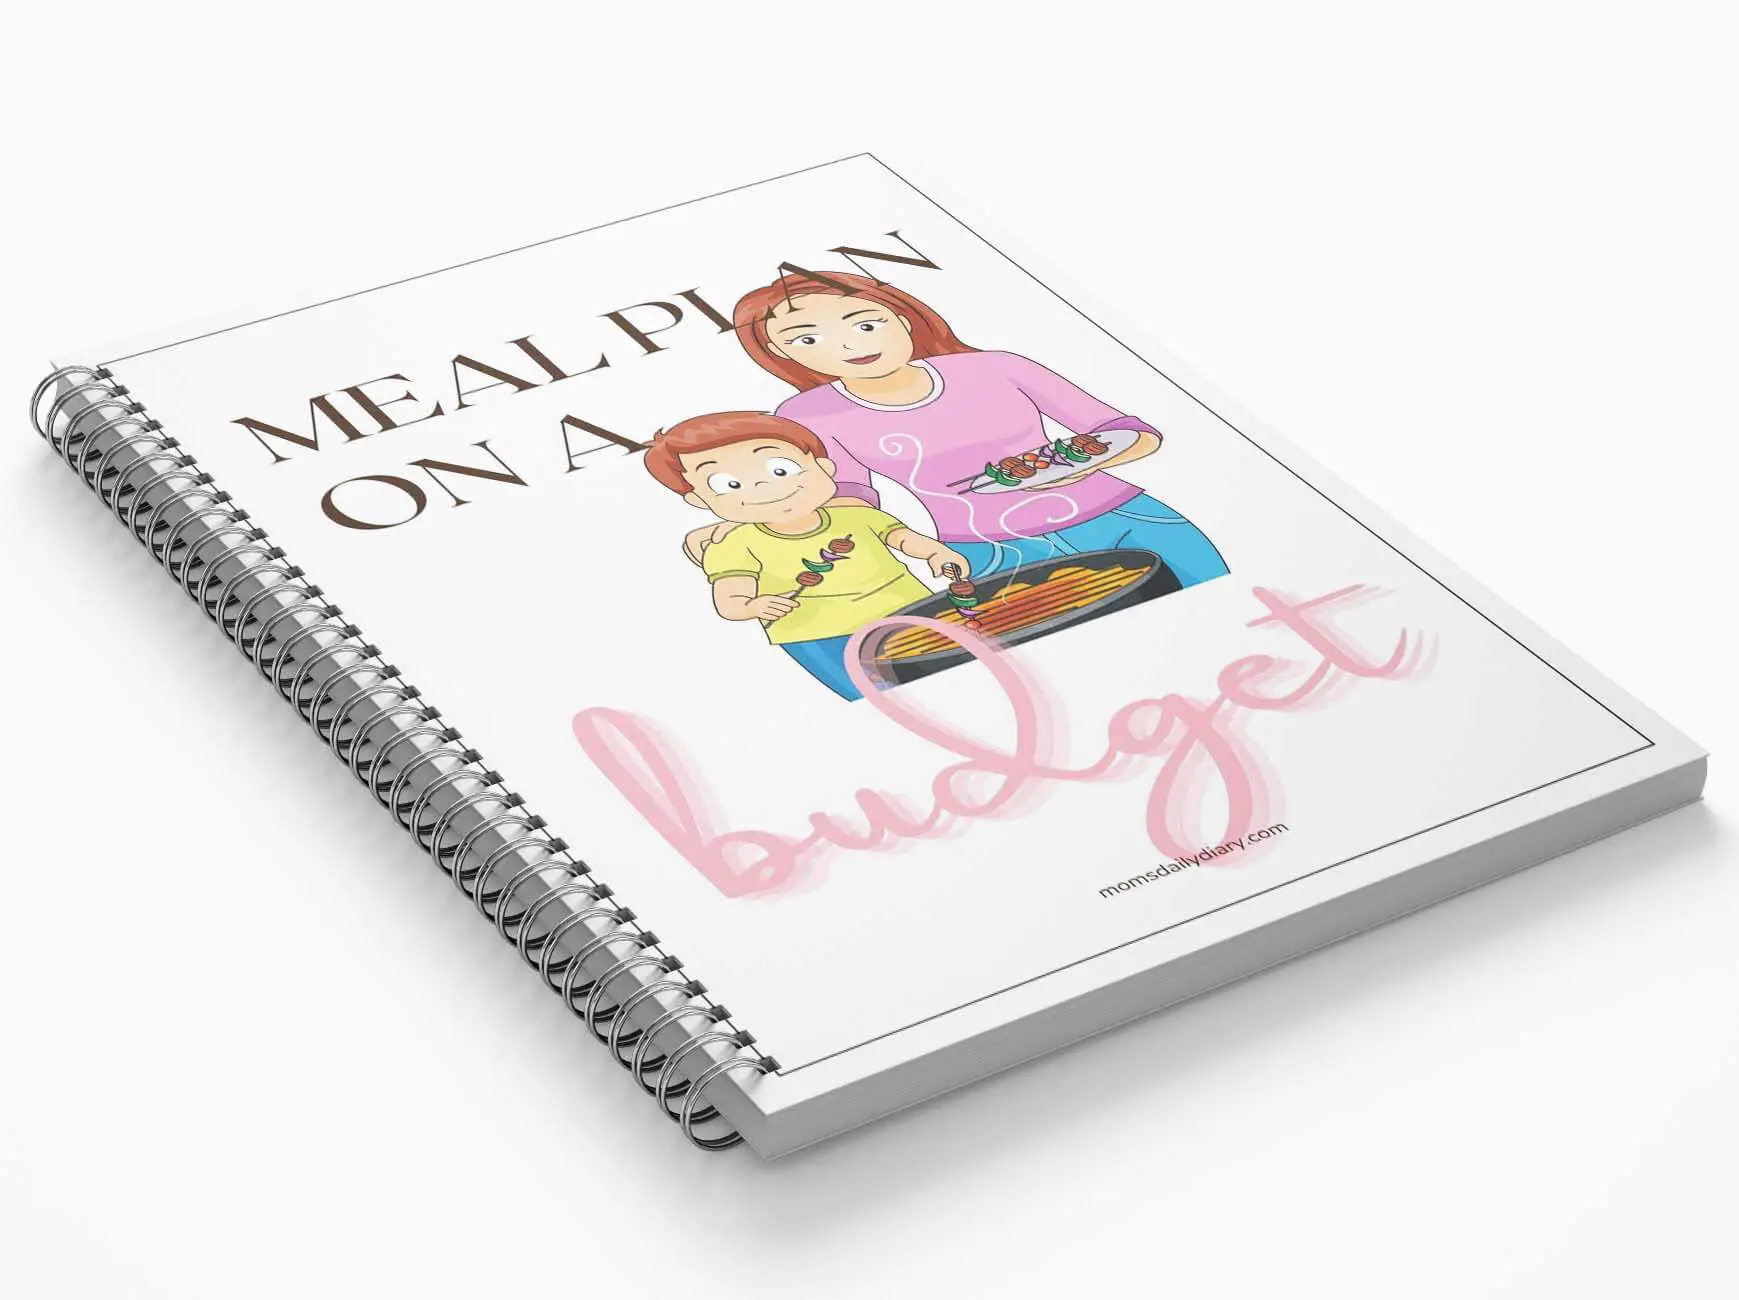 Promotional image of a spiral notepad with text Meal plan on a budget and an illustration of mom and toddler cooking together.